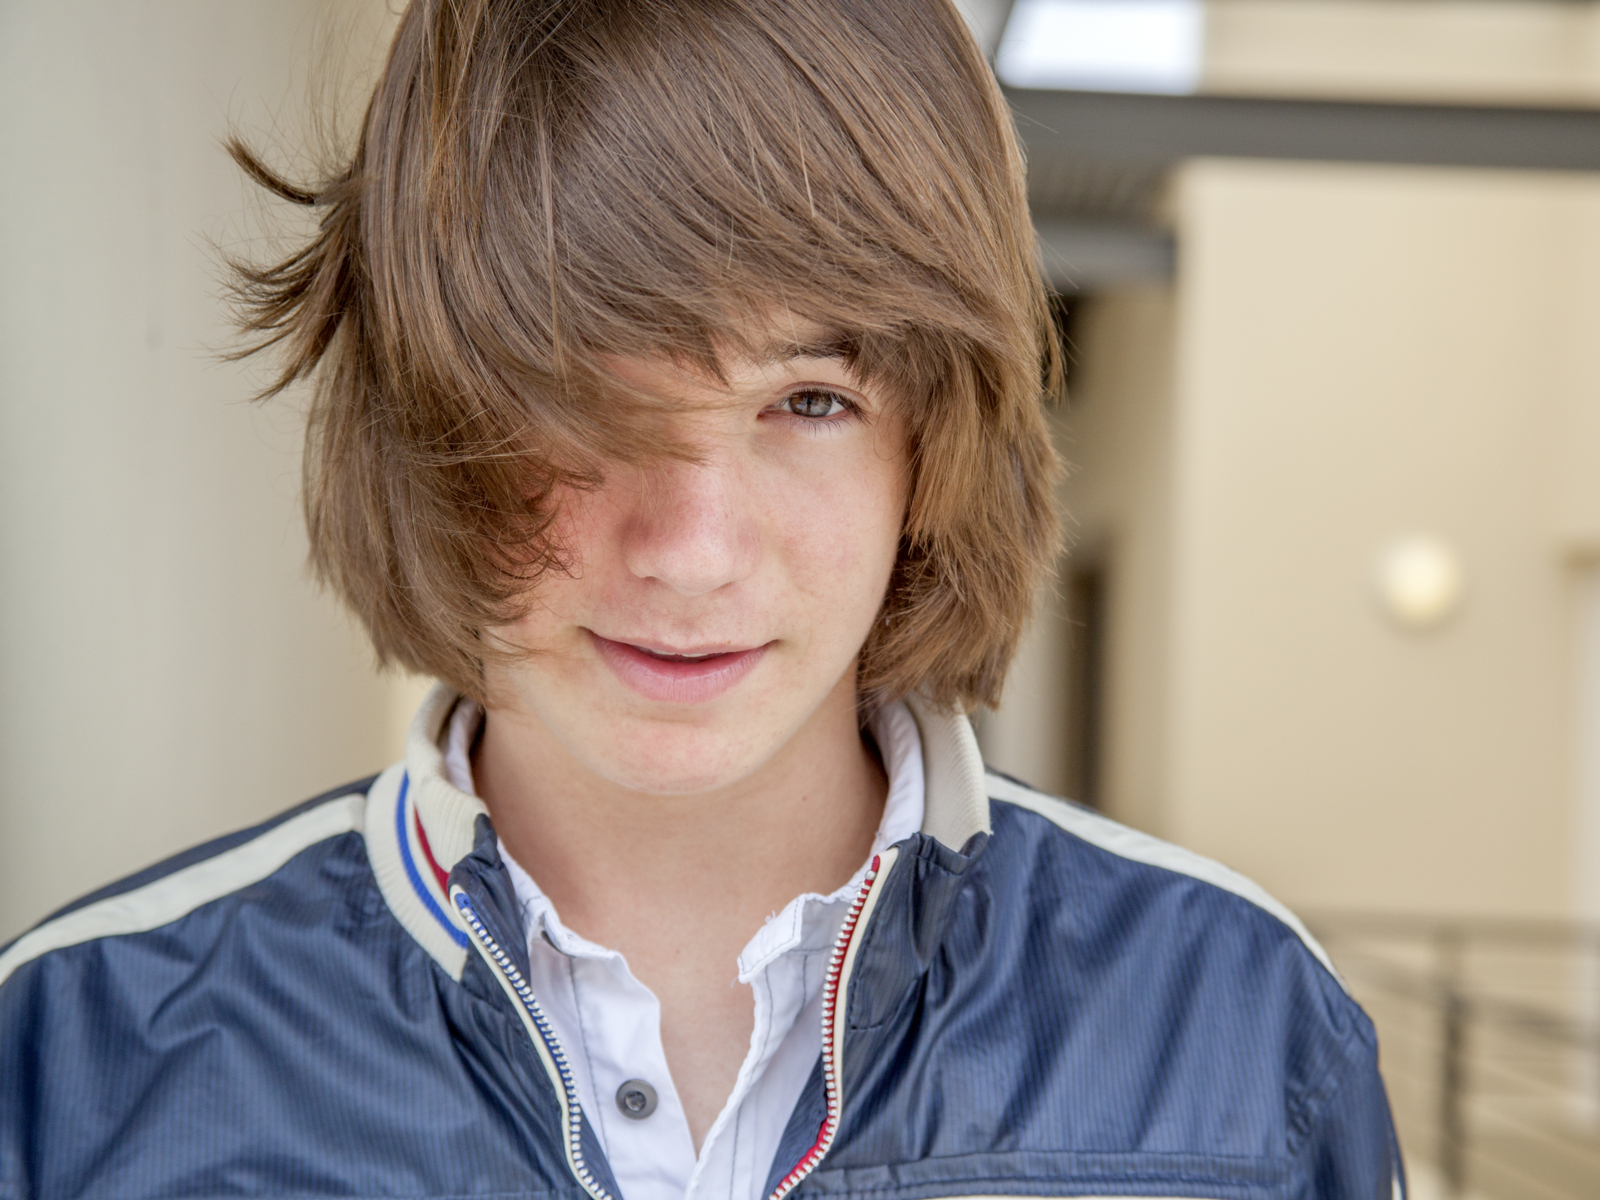 One of our favorite long hairstyles for boys titled the Skater Boy Razored Shag